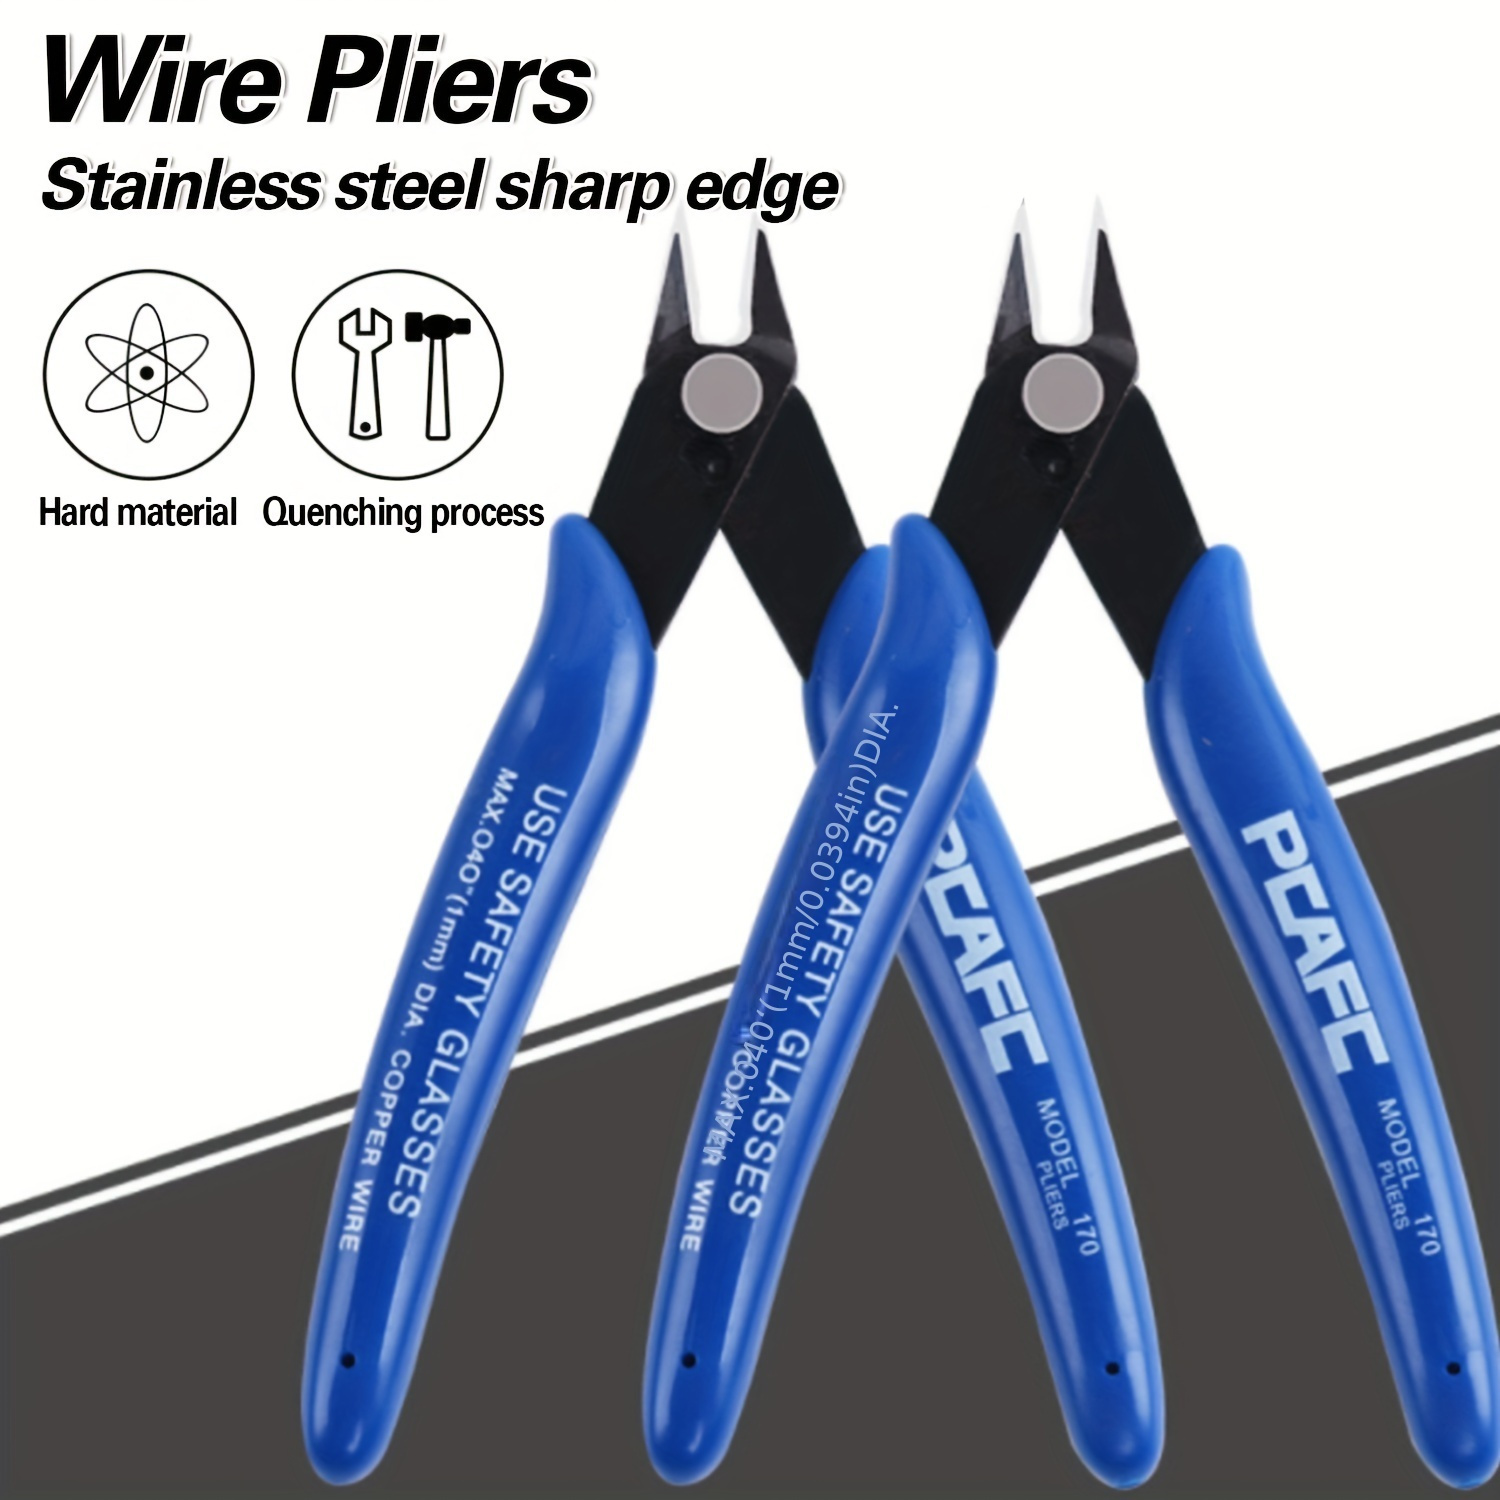 

1pc Precision Wire Cutters, Stainless Steel Sharp Edge With Comfort Grip, Spring Design For Jewelry, Electronics, And Hobby Crafting, Hard Material With Quenching Process, Blue Handle